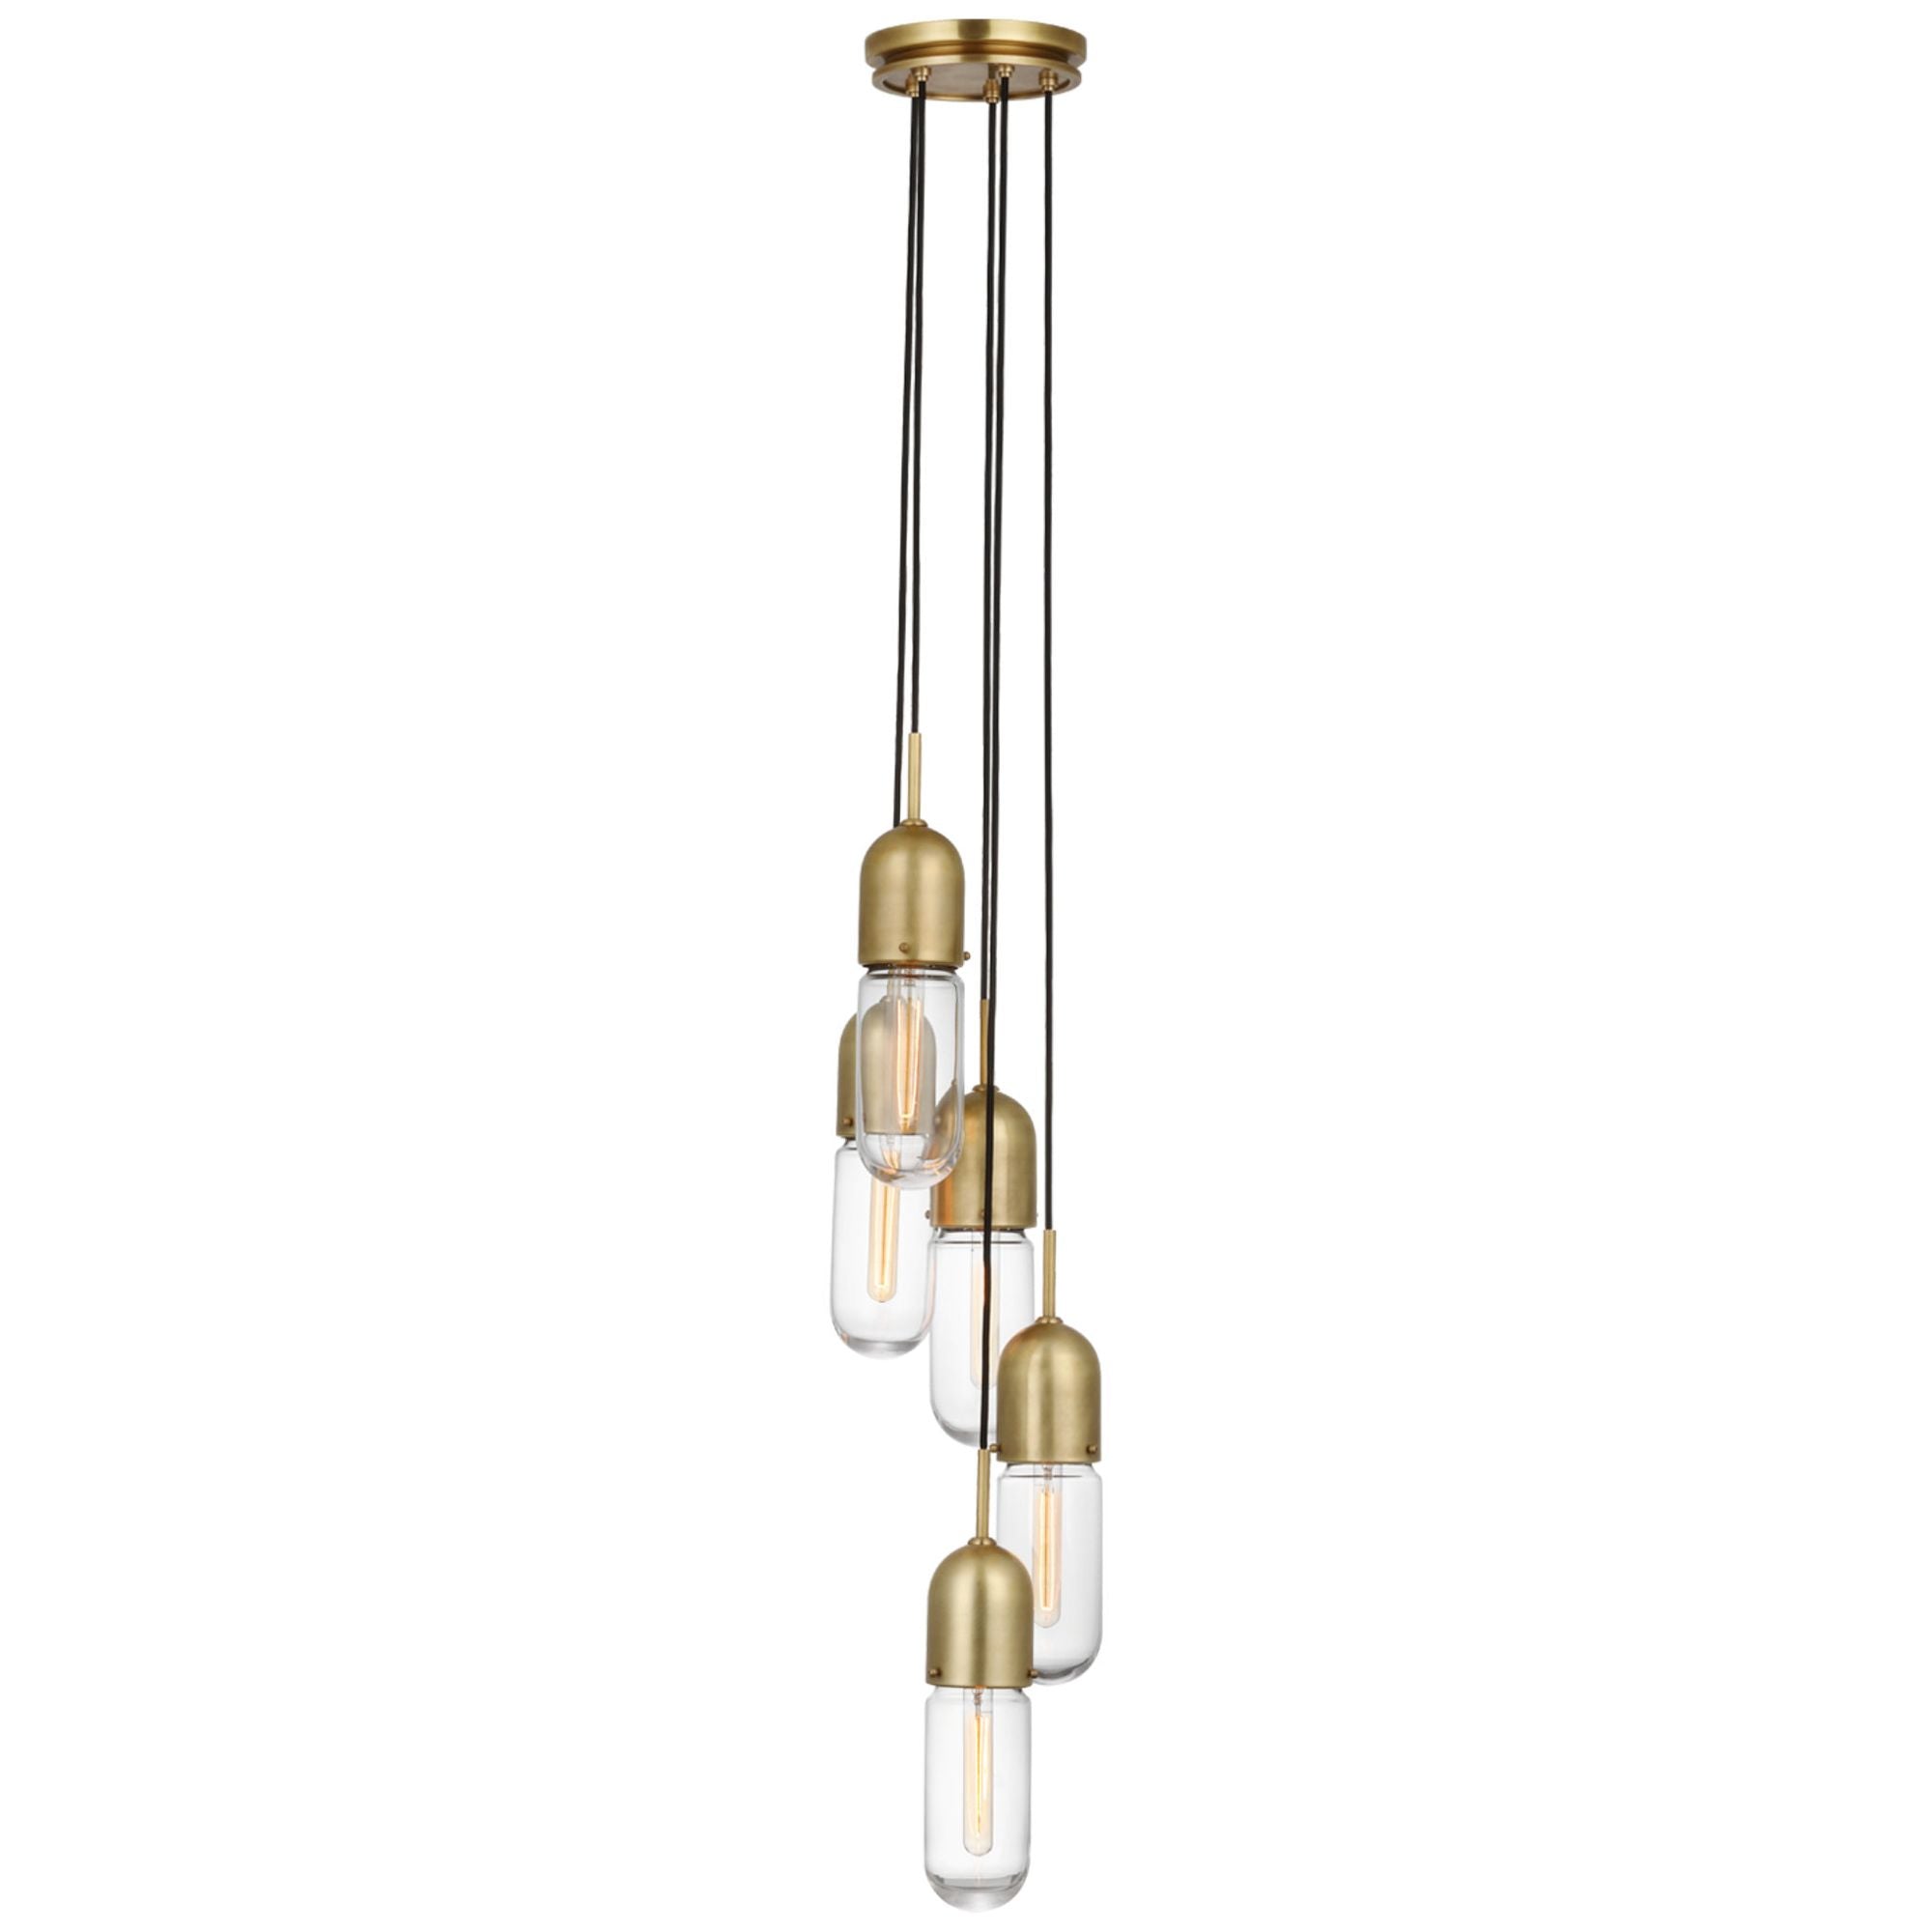 Thomas O'Brien Junio 5-Light Pendant in Hand-Rubbed Antique Brass with Clear Glass